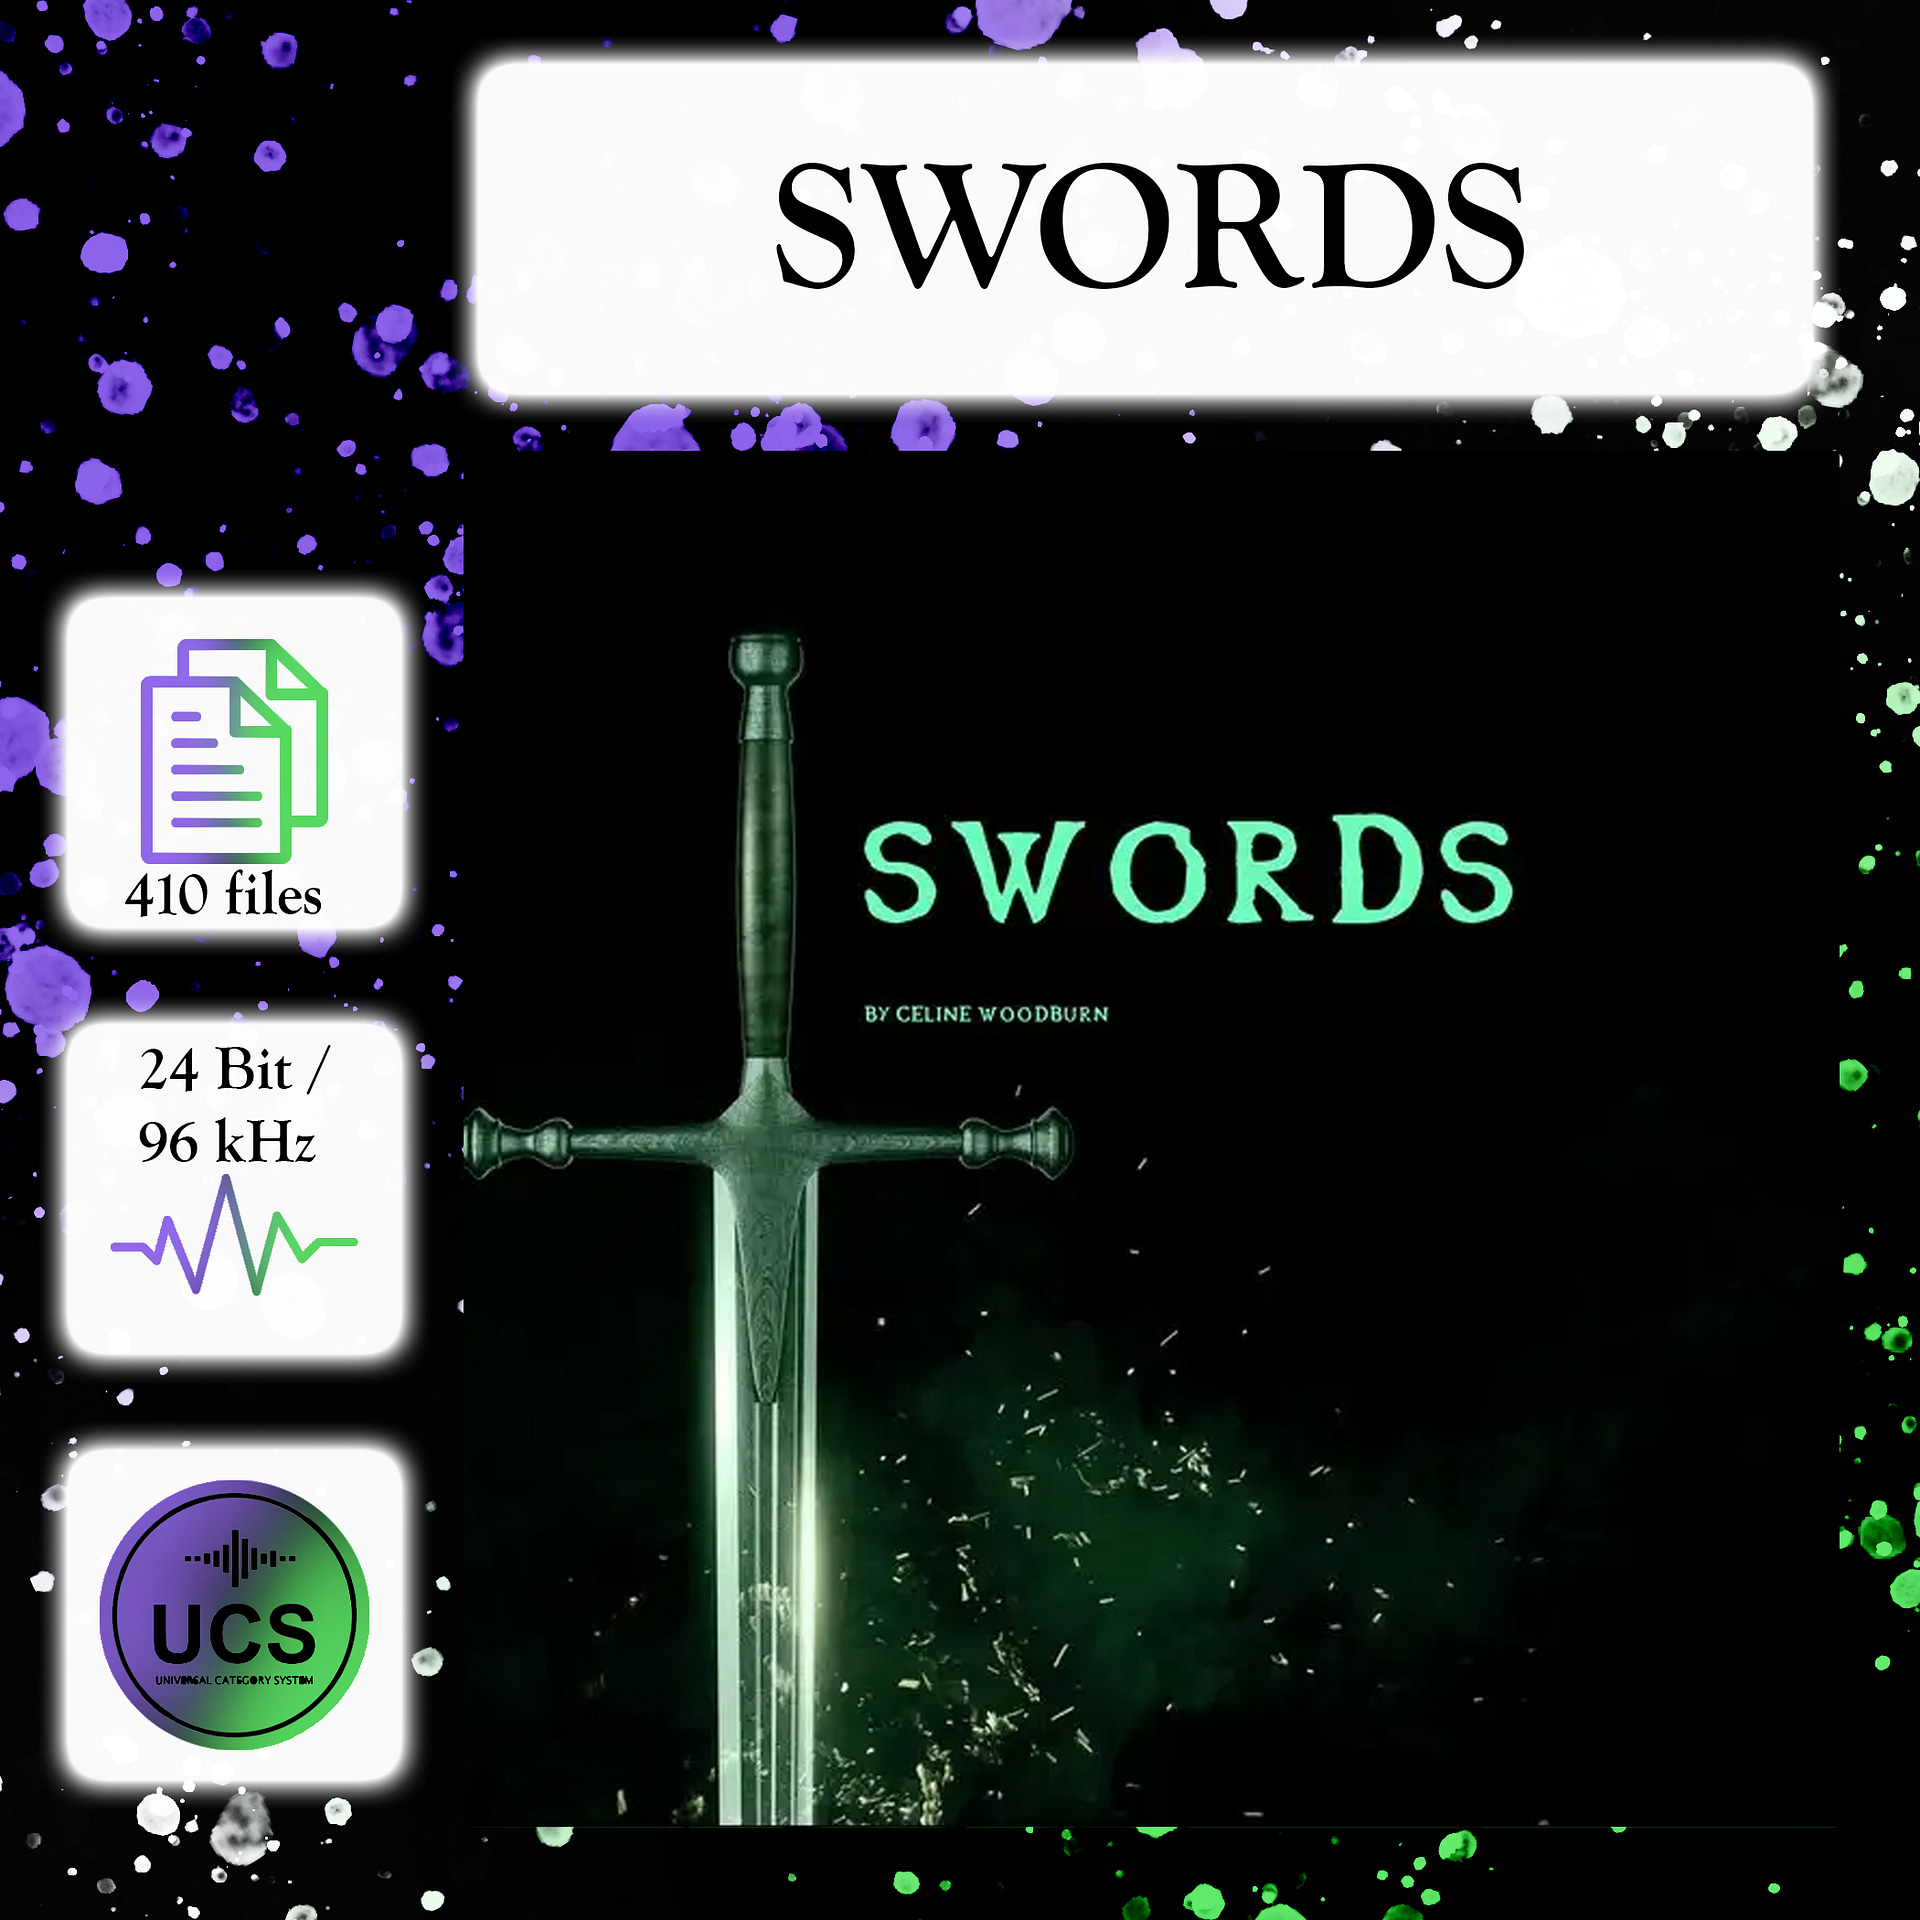 Swords | Sword Sound Effects Library | Asoundeffect.com